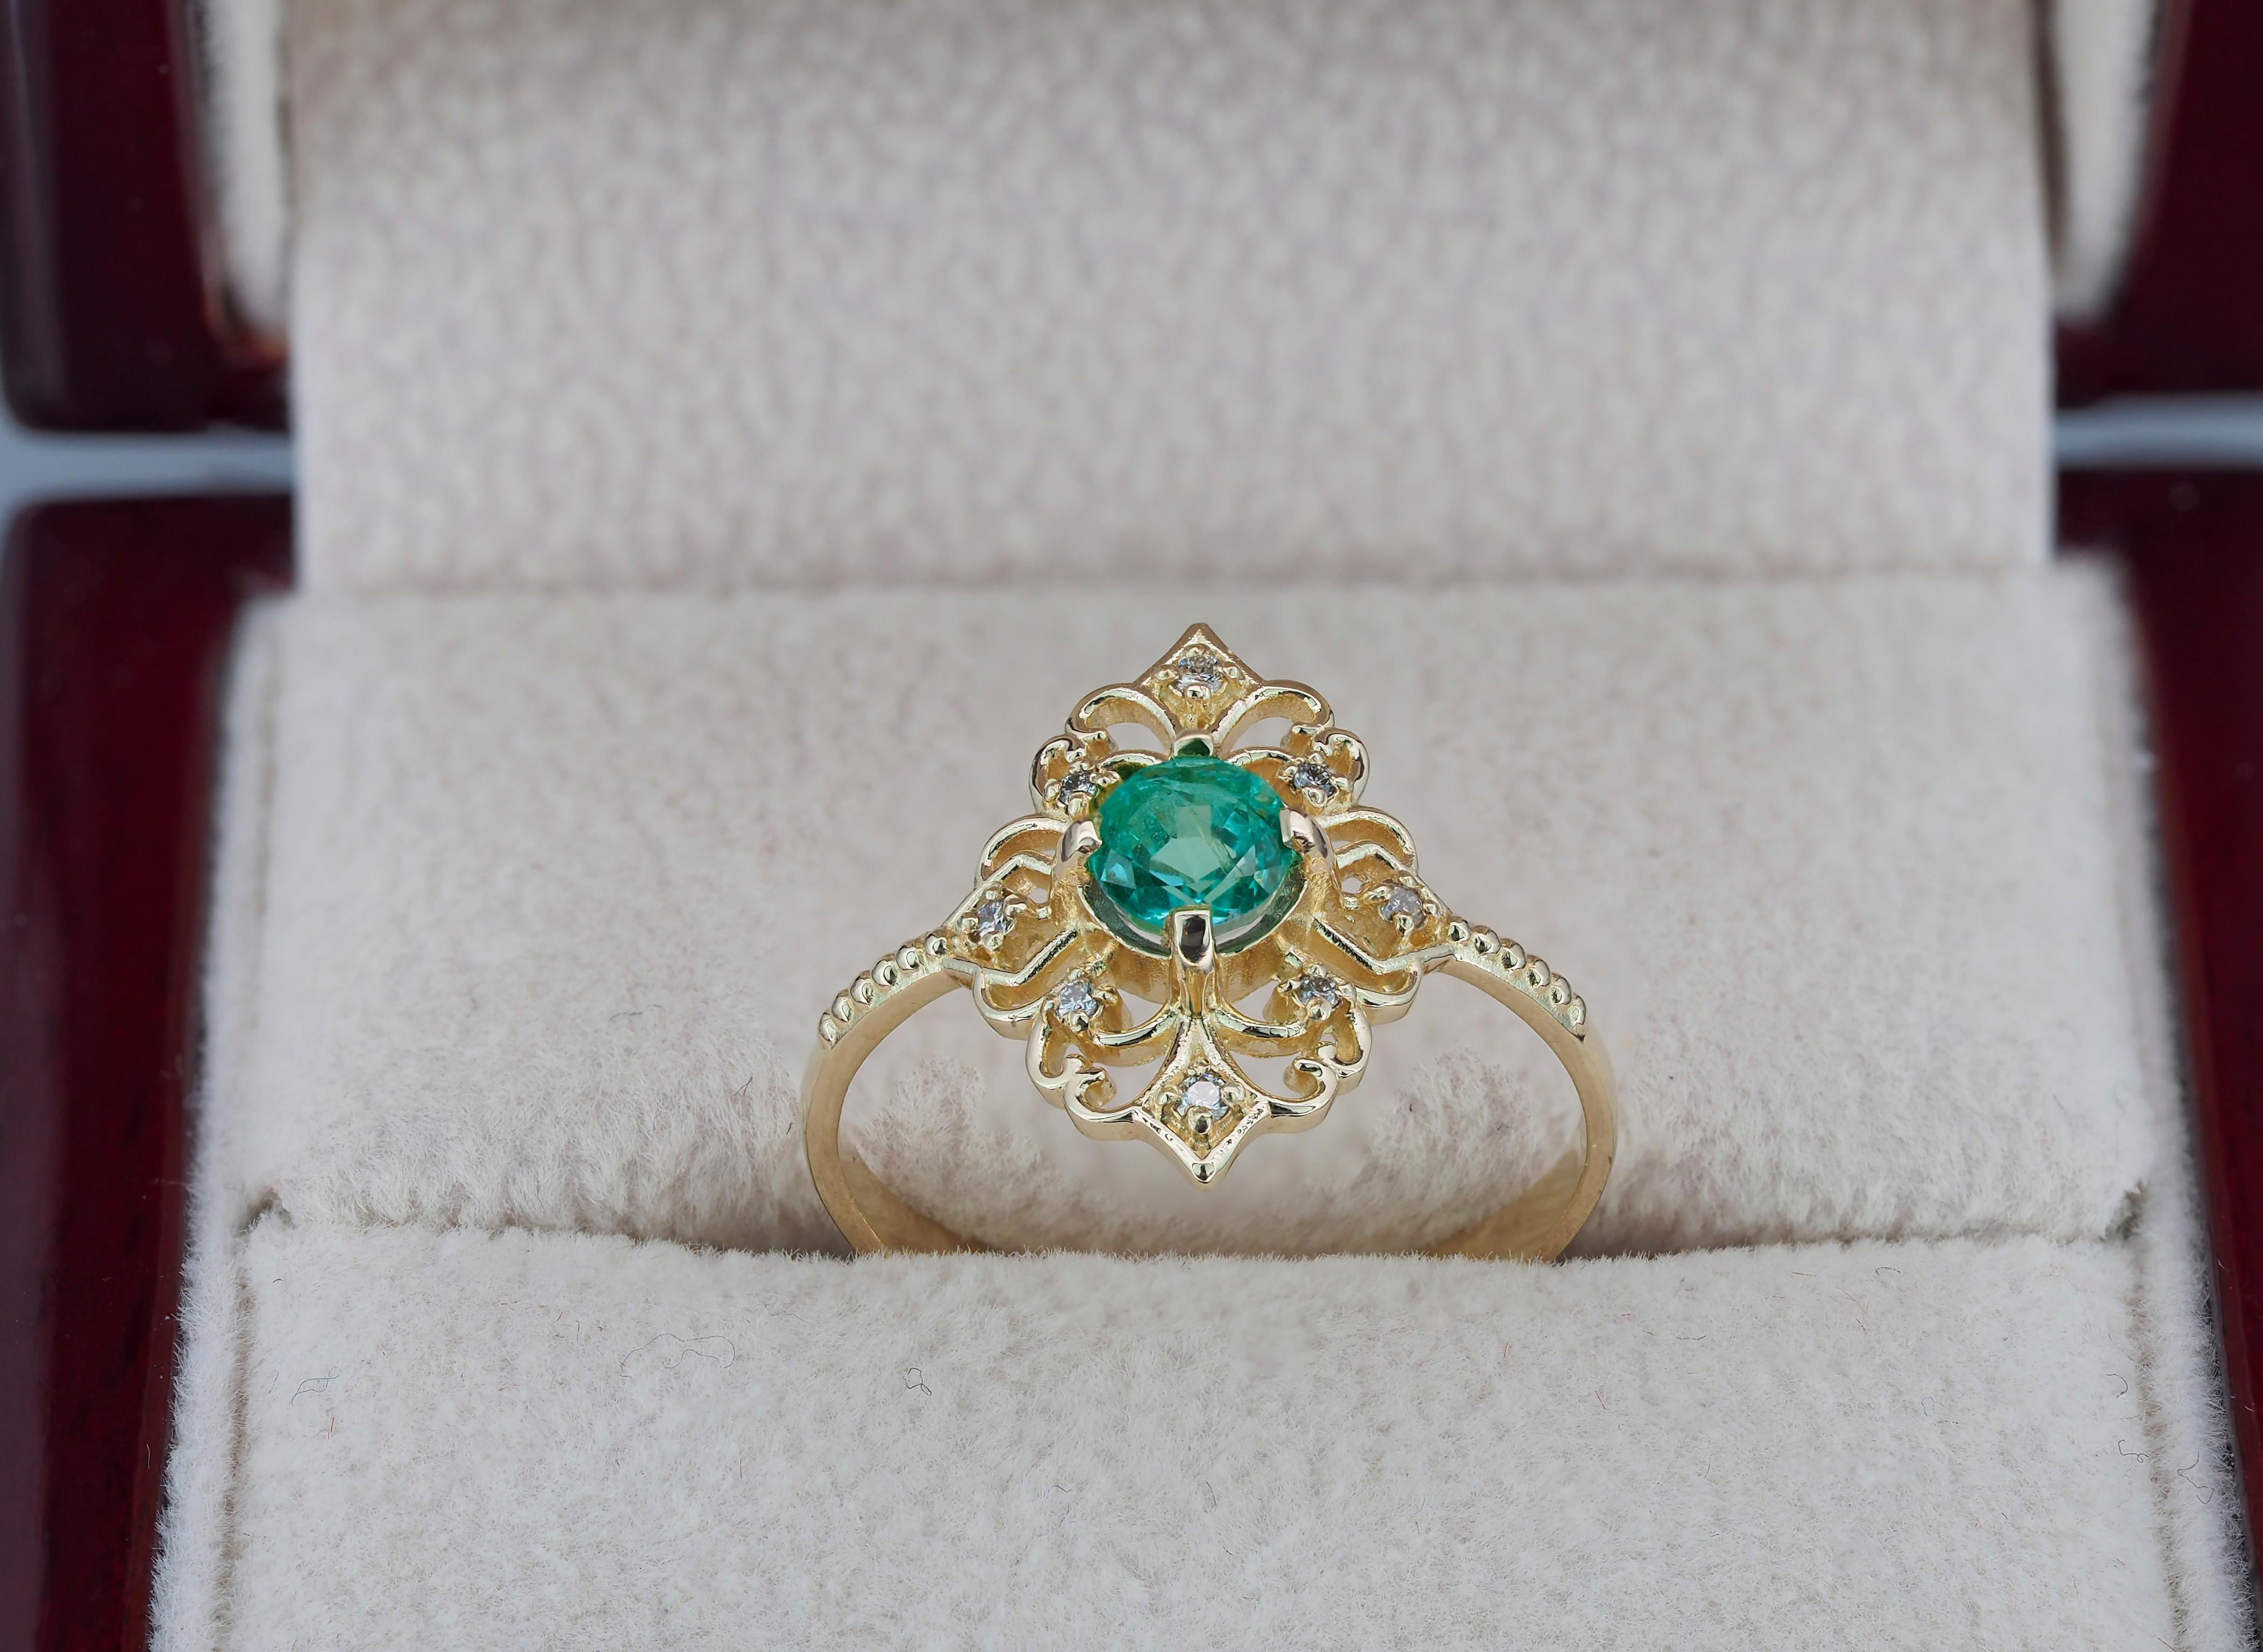 For Sale:  14 K Gold Ring with Emerald and Diamonds 3